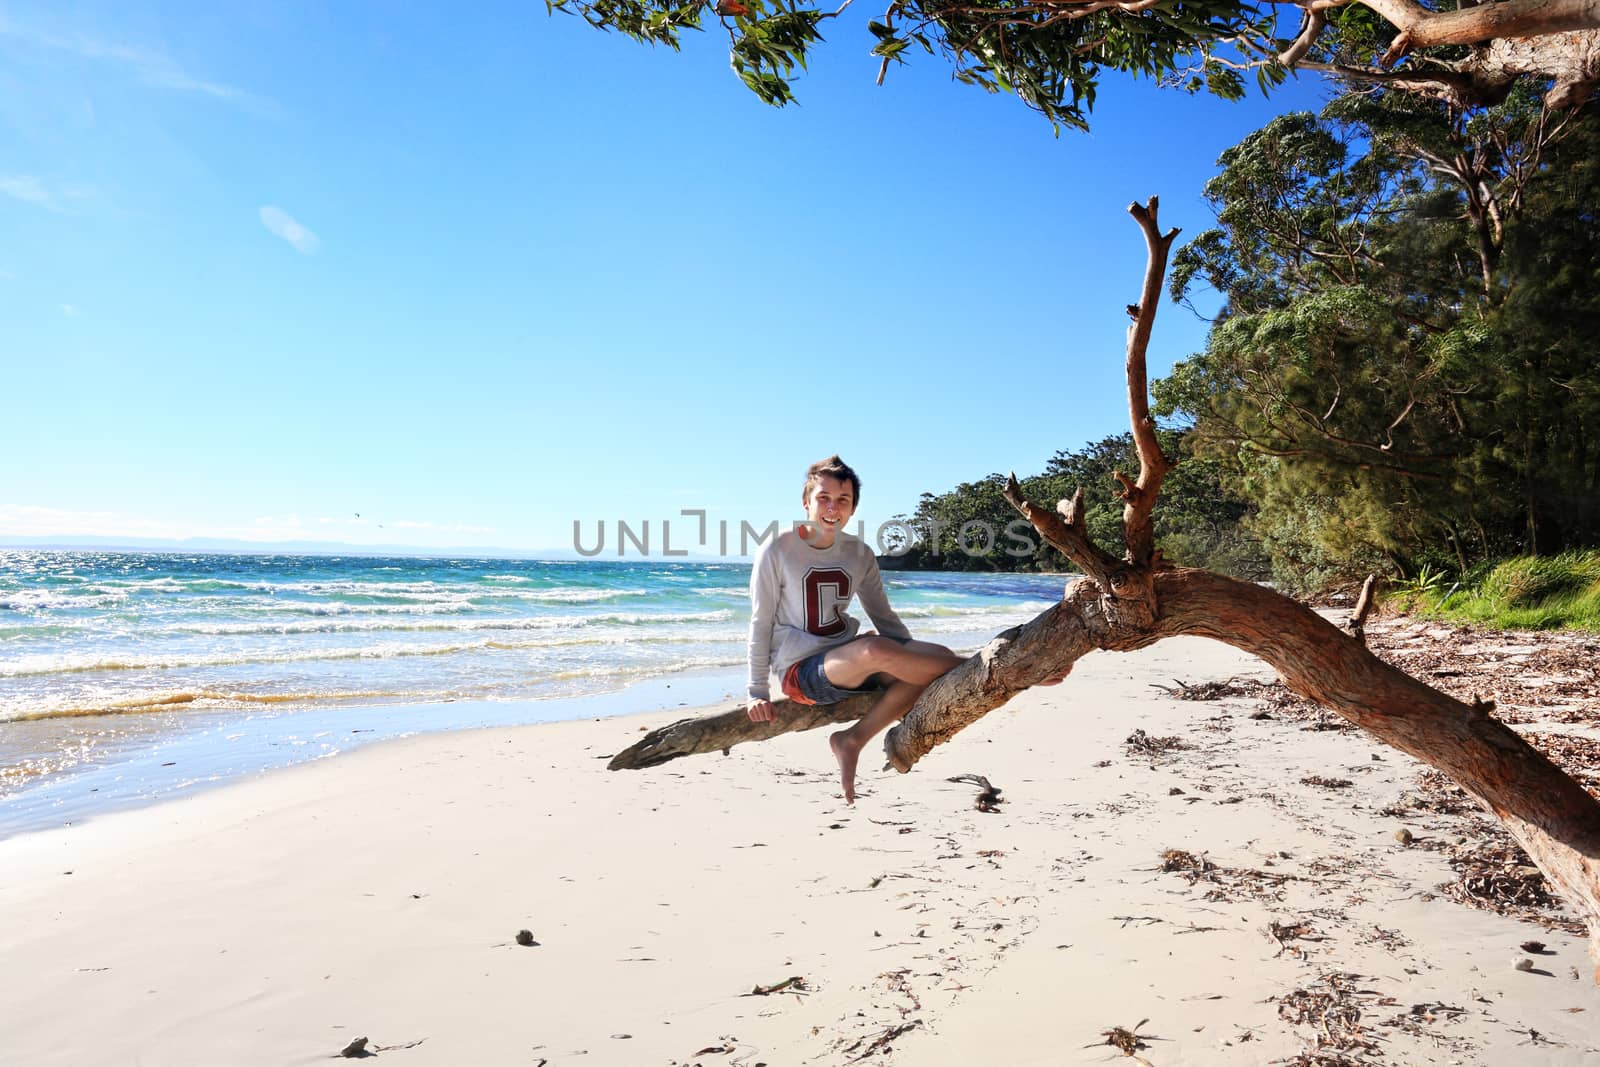 Teen boy sitting on a gum tree outstretched branch enjoying a vacation on a glorious day at the beach in NSW Australia